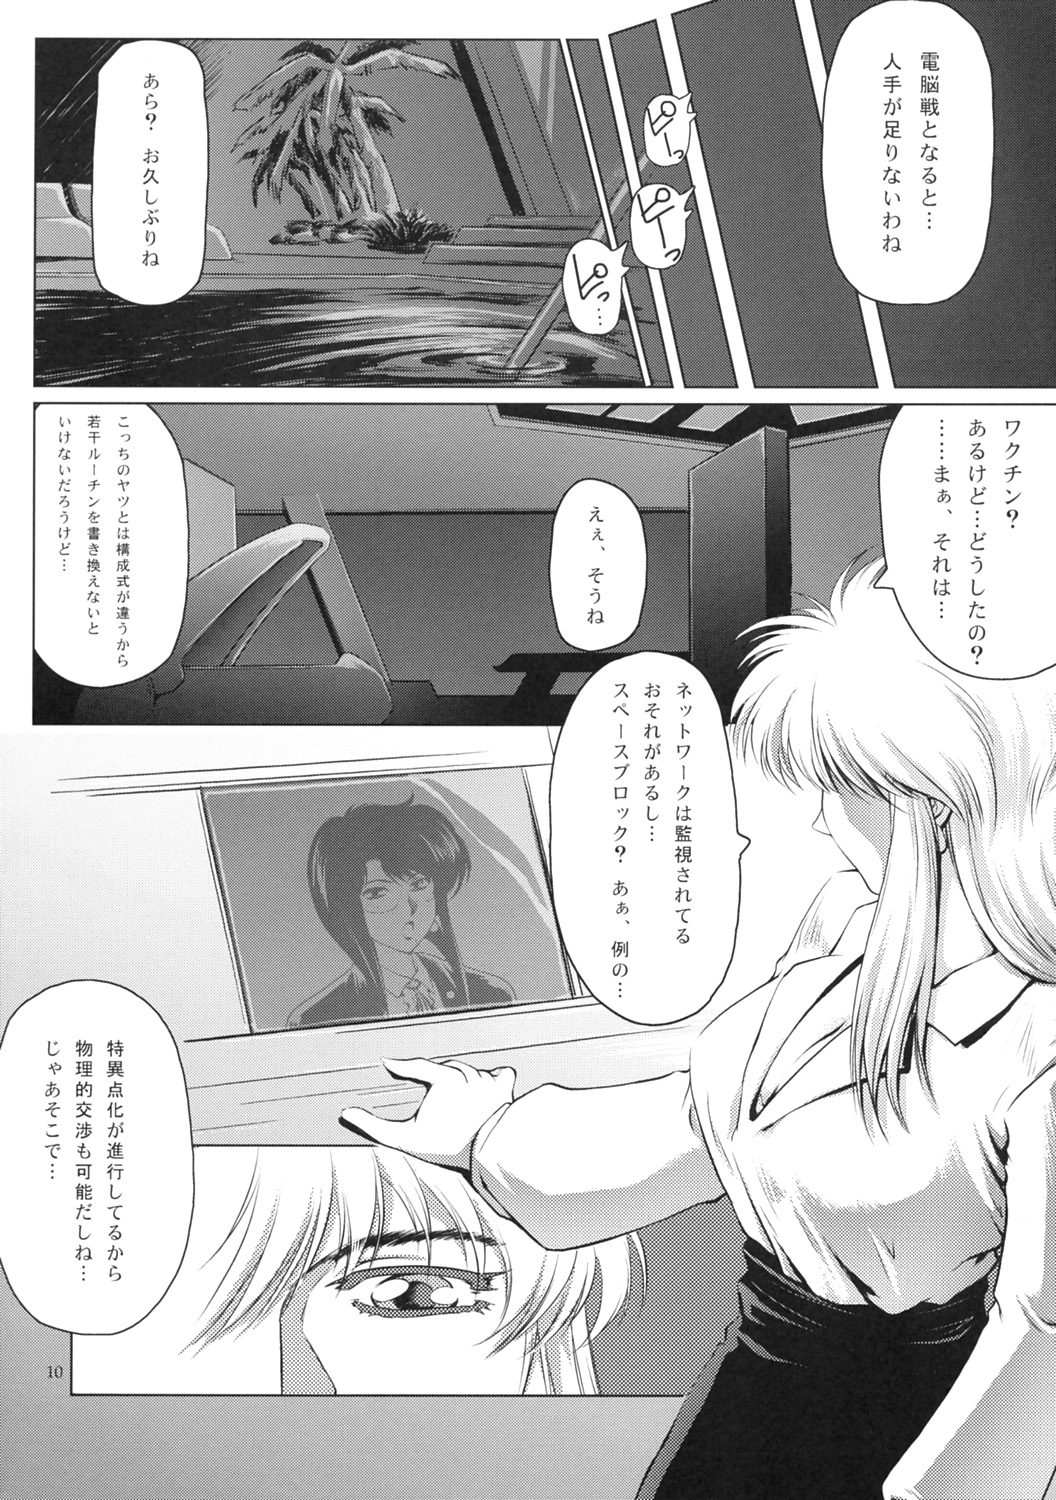 (C67) [Type-R (Rance)] Manga Onsoku no Are (Sonic Soldier Borgman) page 11 full